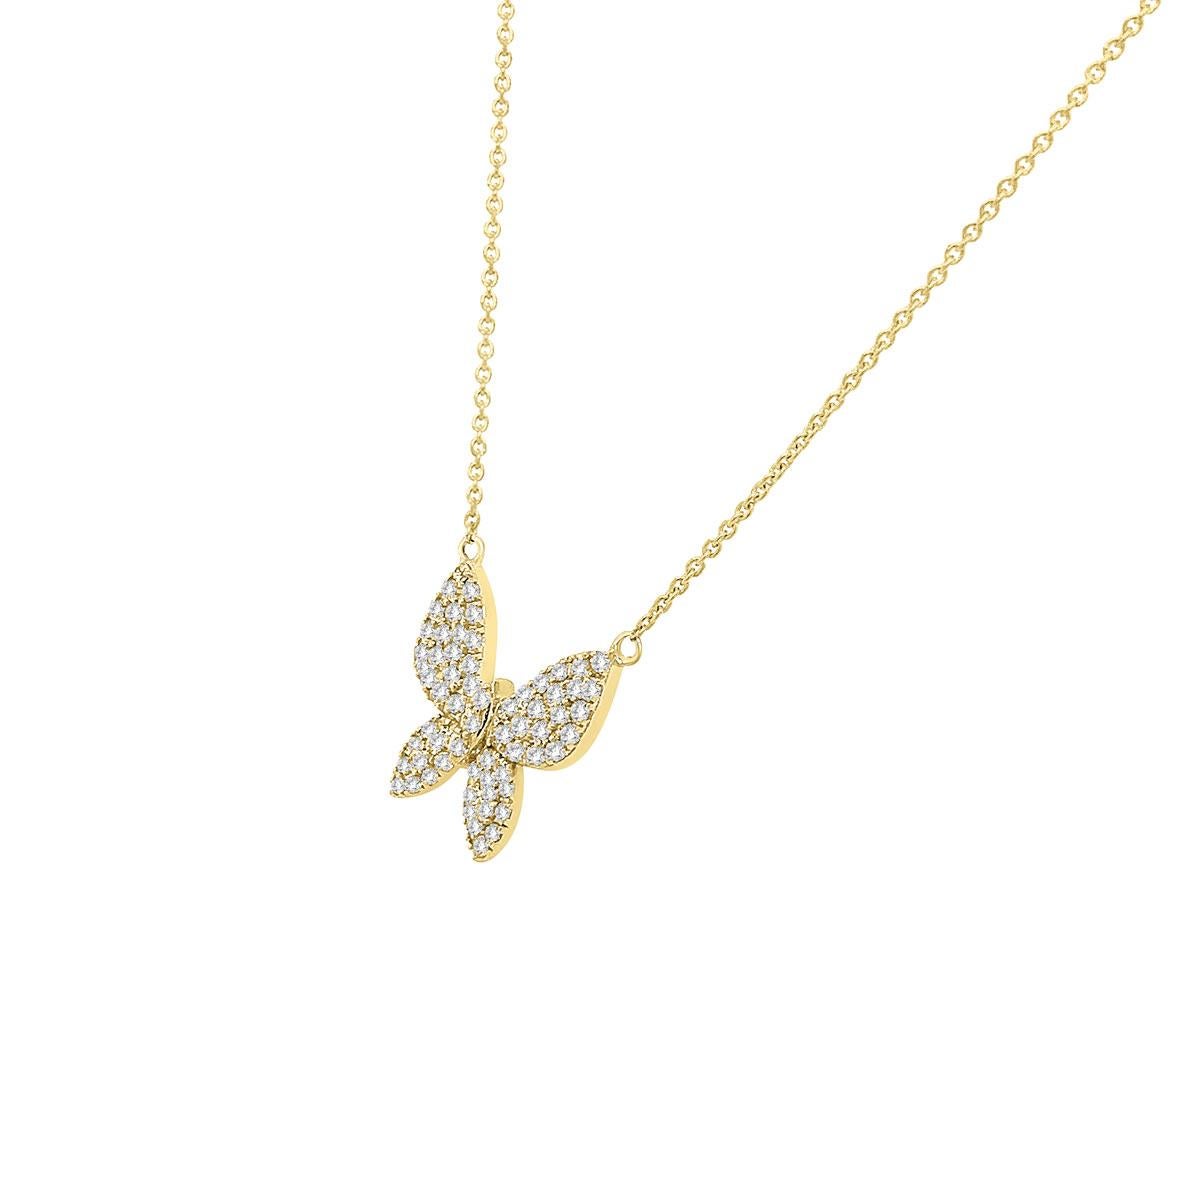 This delicate necklace features a 16 MMx16 MM Butterfly diamond pendent micro-prong-set stationed on a thin gold chain. Experience the difference in person!

Product details: 

Center Gemstone Type: NATURAL DIAMOND
Center Gemstone Shape: